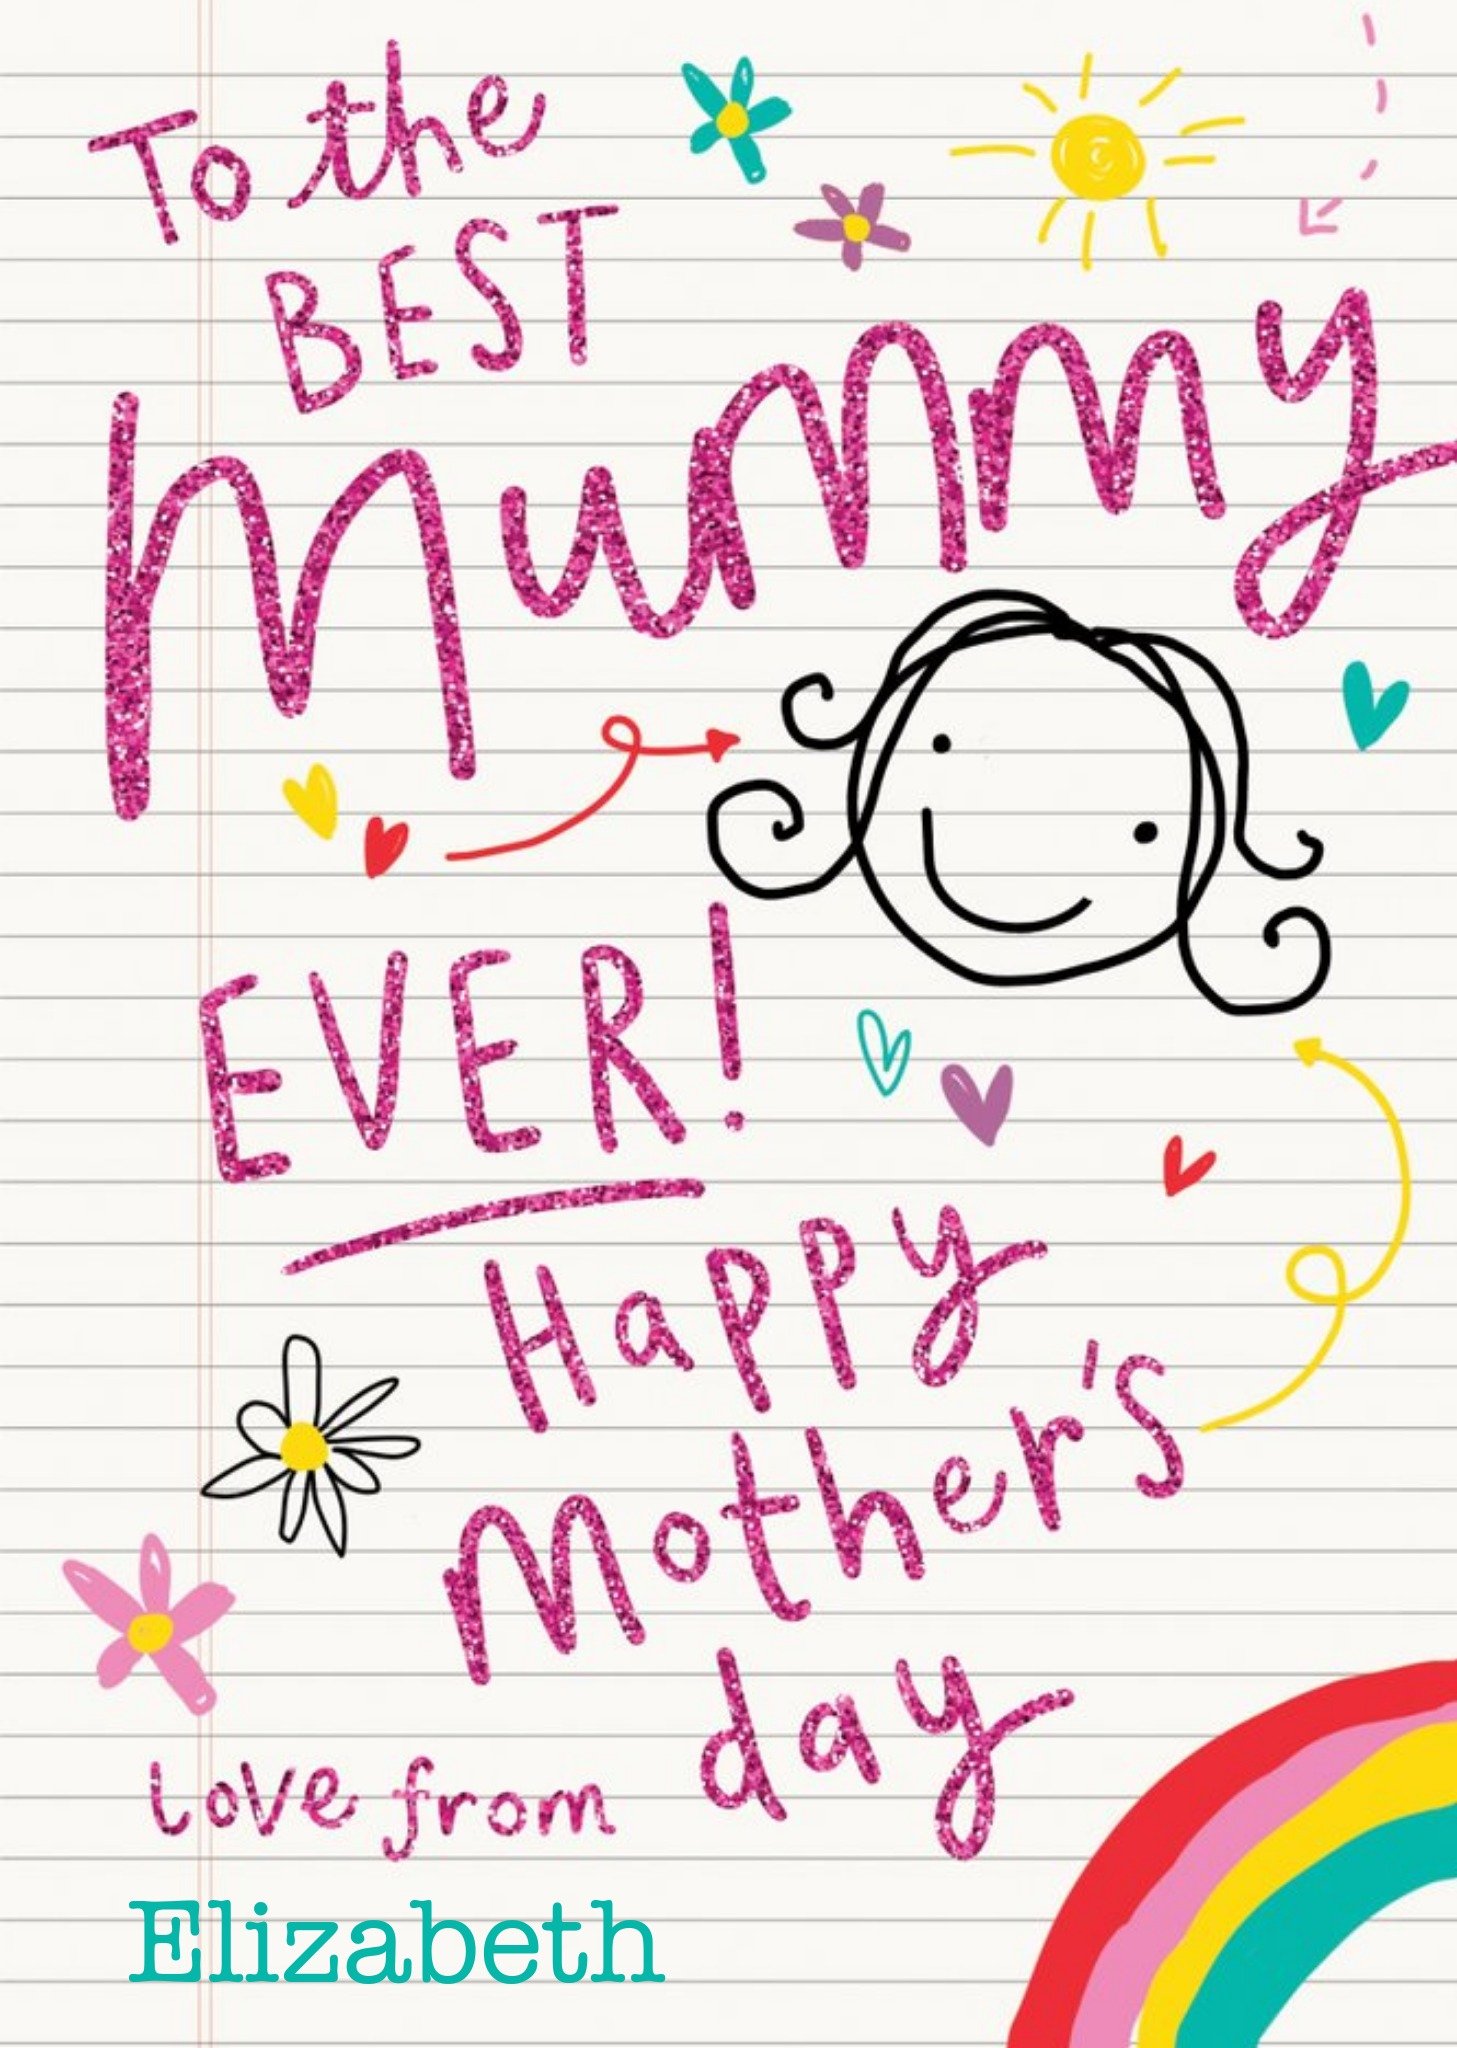 Moonpig Childlike Doodles And Typography On Note Paper Mother's Day Card, Large